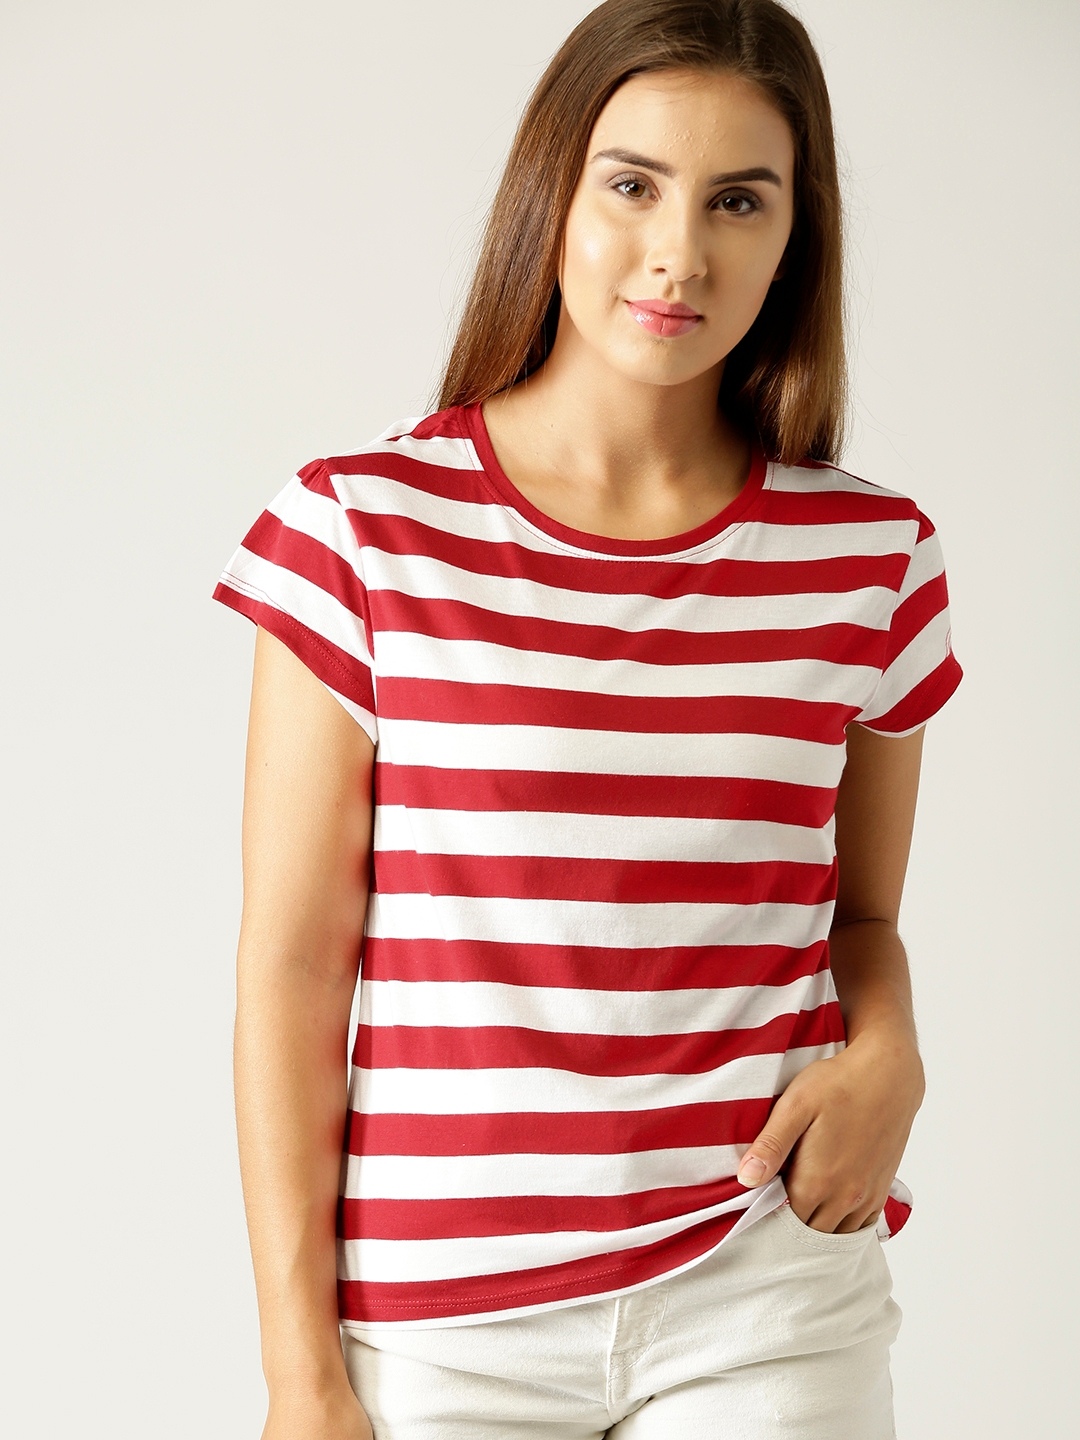 red and white striped tee shirt womens